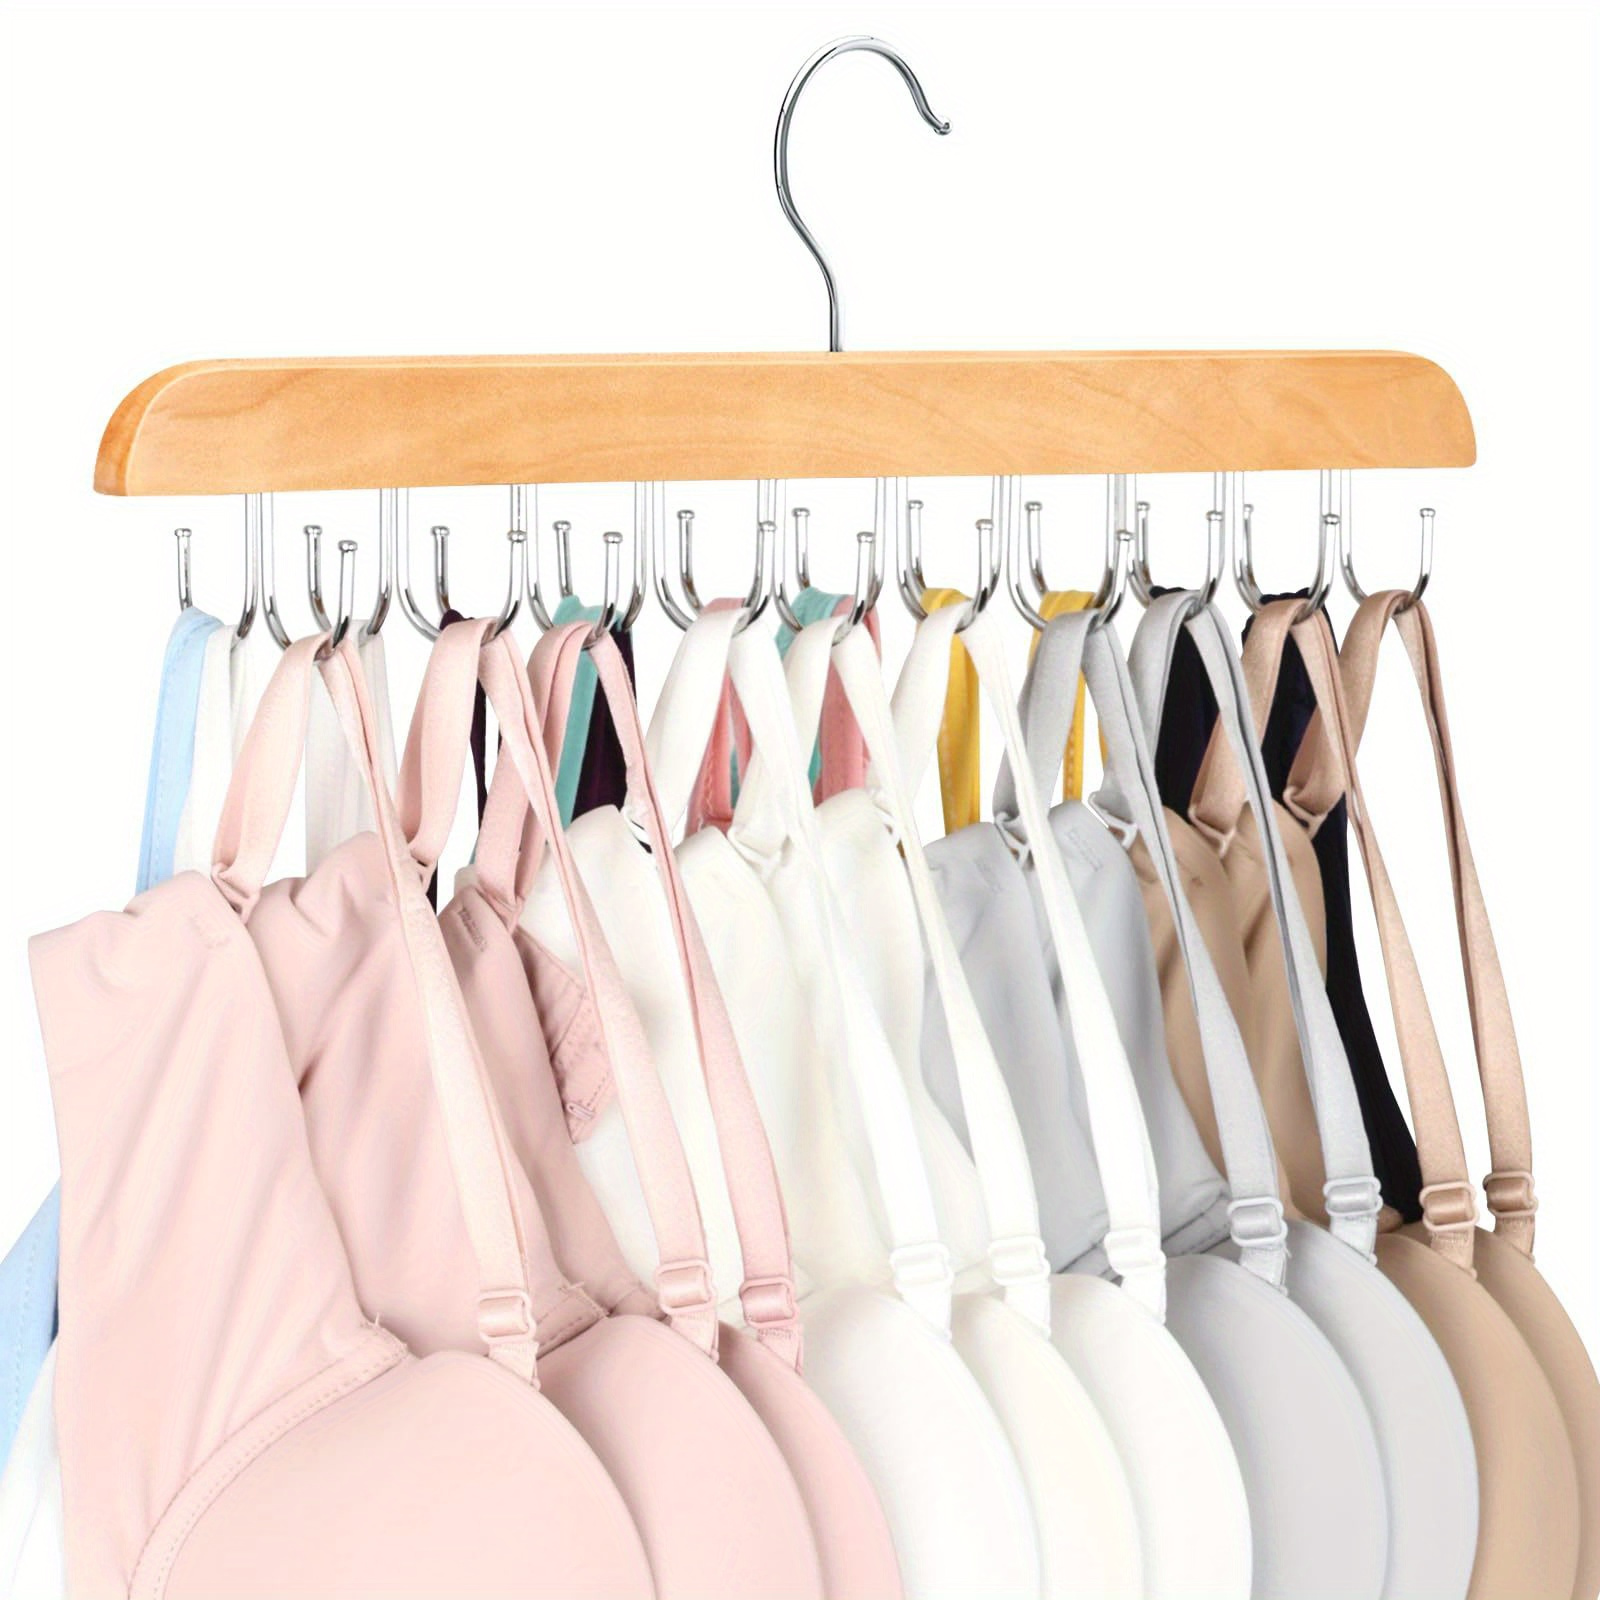 

Wooden Bra Hanger With 20 Hooks - Polished Finish Clothes Organizer Rack For Lingerie, Ties, Scarves, And Accessories - Durable Bedroom & Closet Storage Solution (1pc)